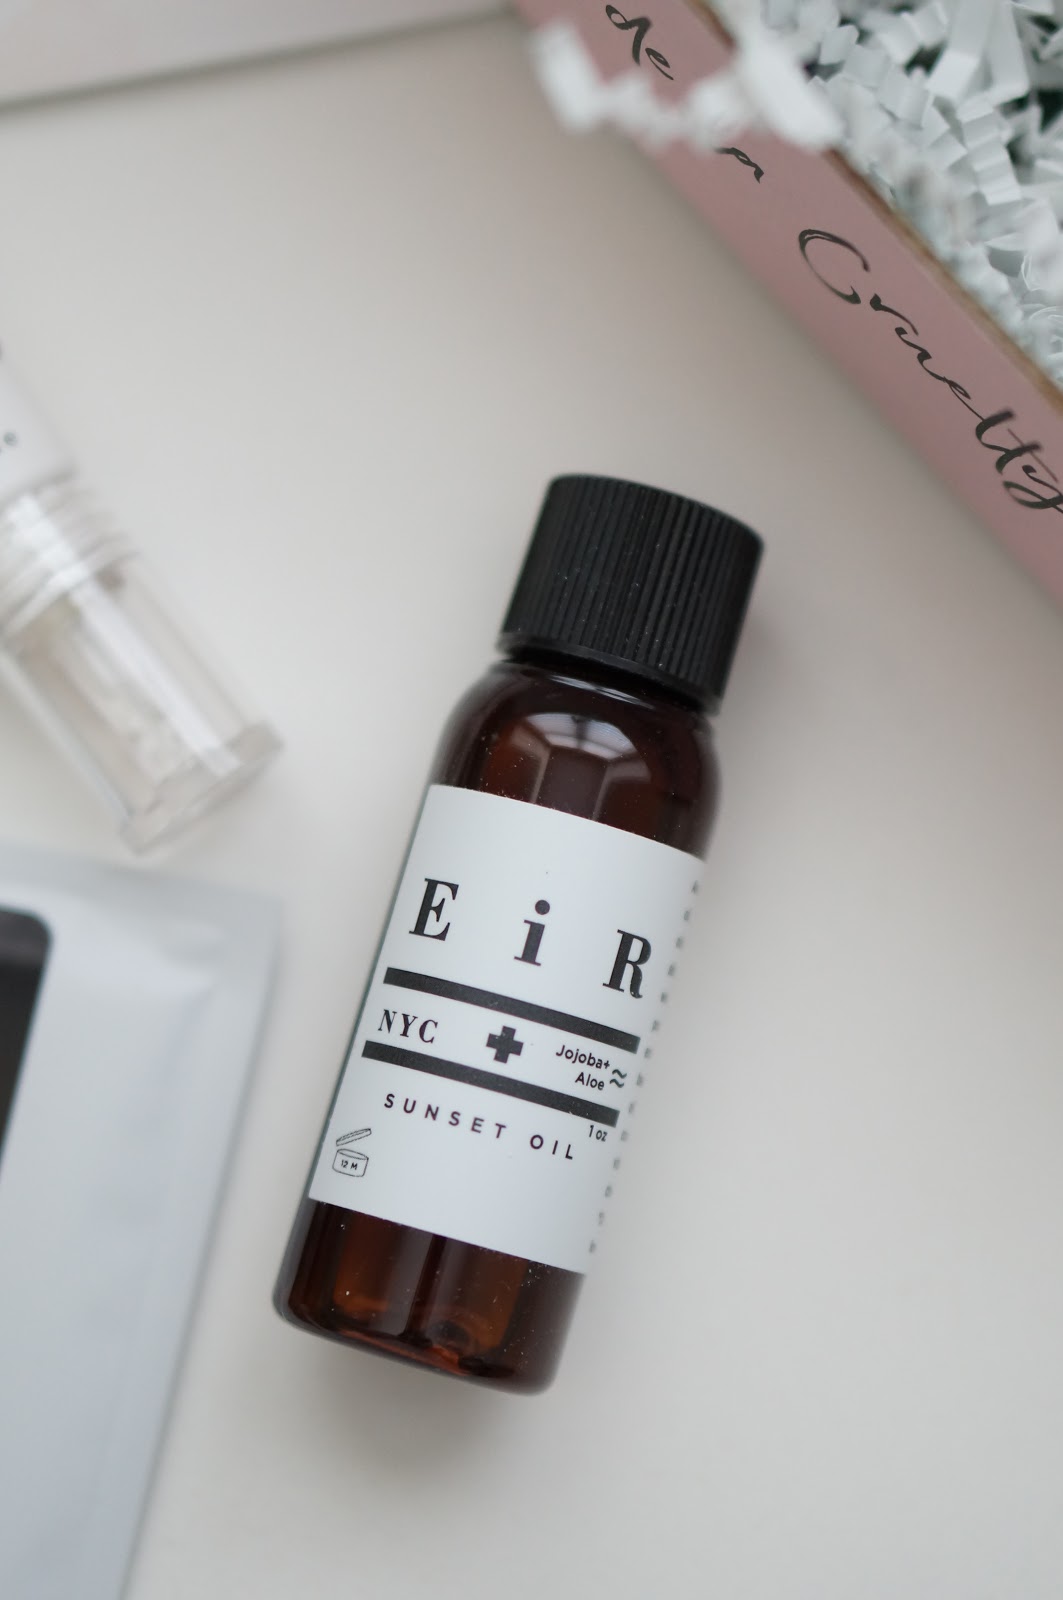 Popular North Carolina style blogger Rebecca Lately shares her Petit Vour Box Review on her blog today.  Click here to see what she got!